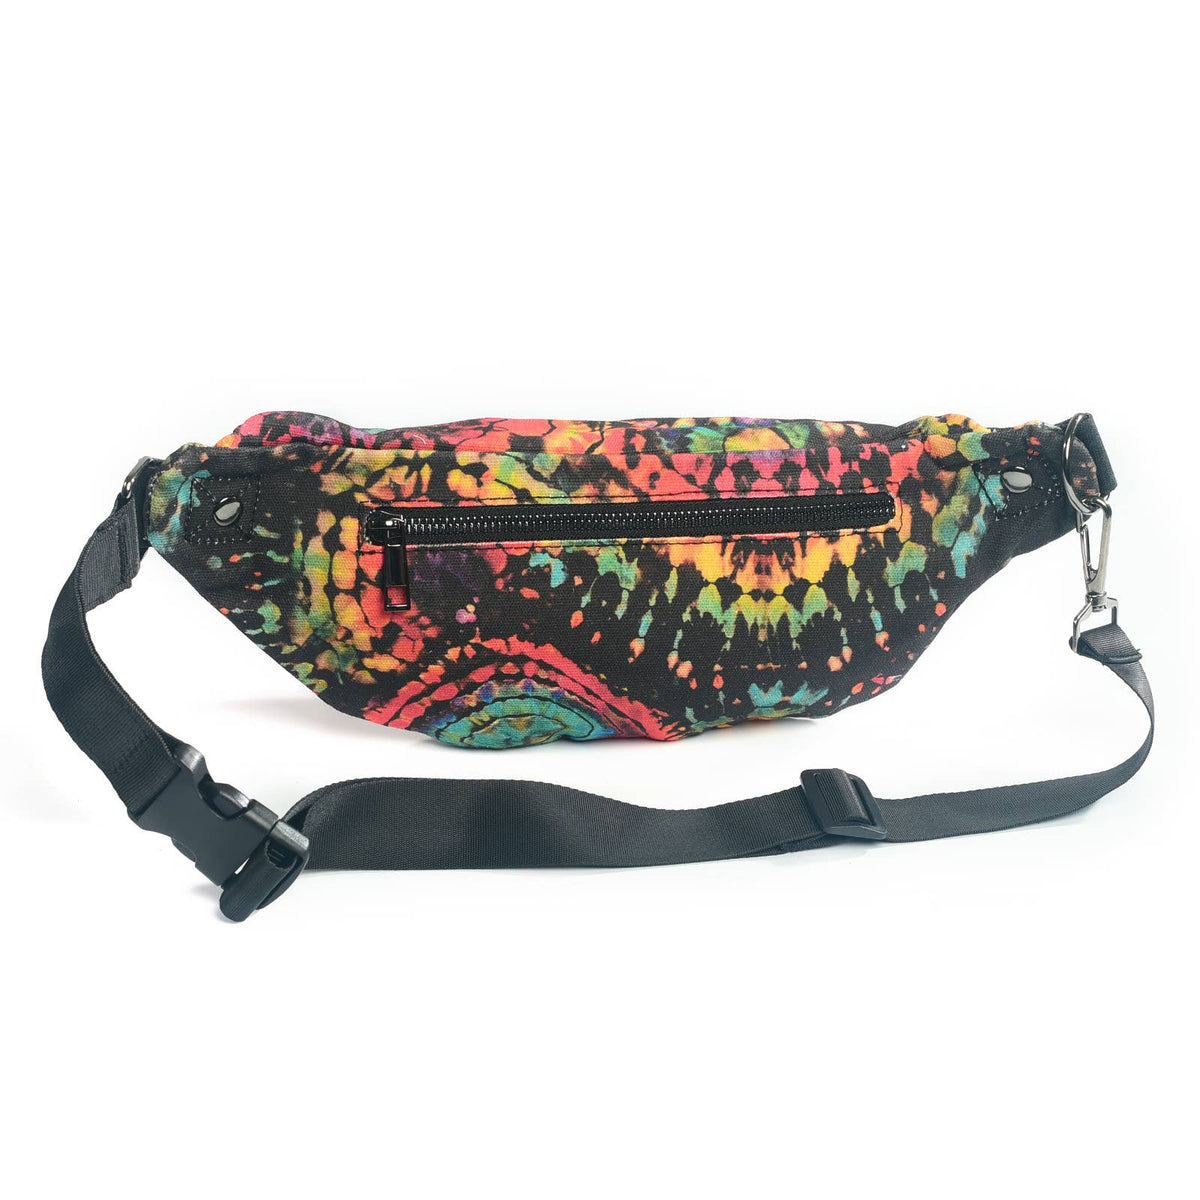 Mellow Groove Fanny Pack: SIZE 2 (M-XL) 37"-48"